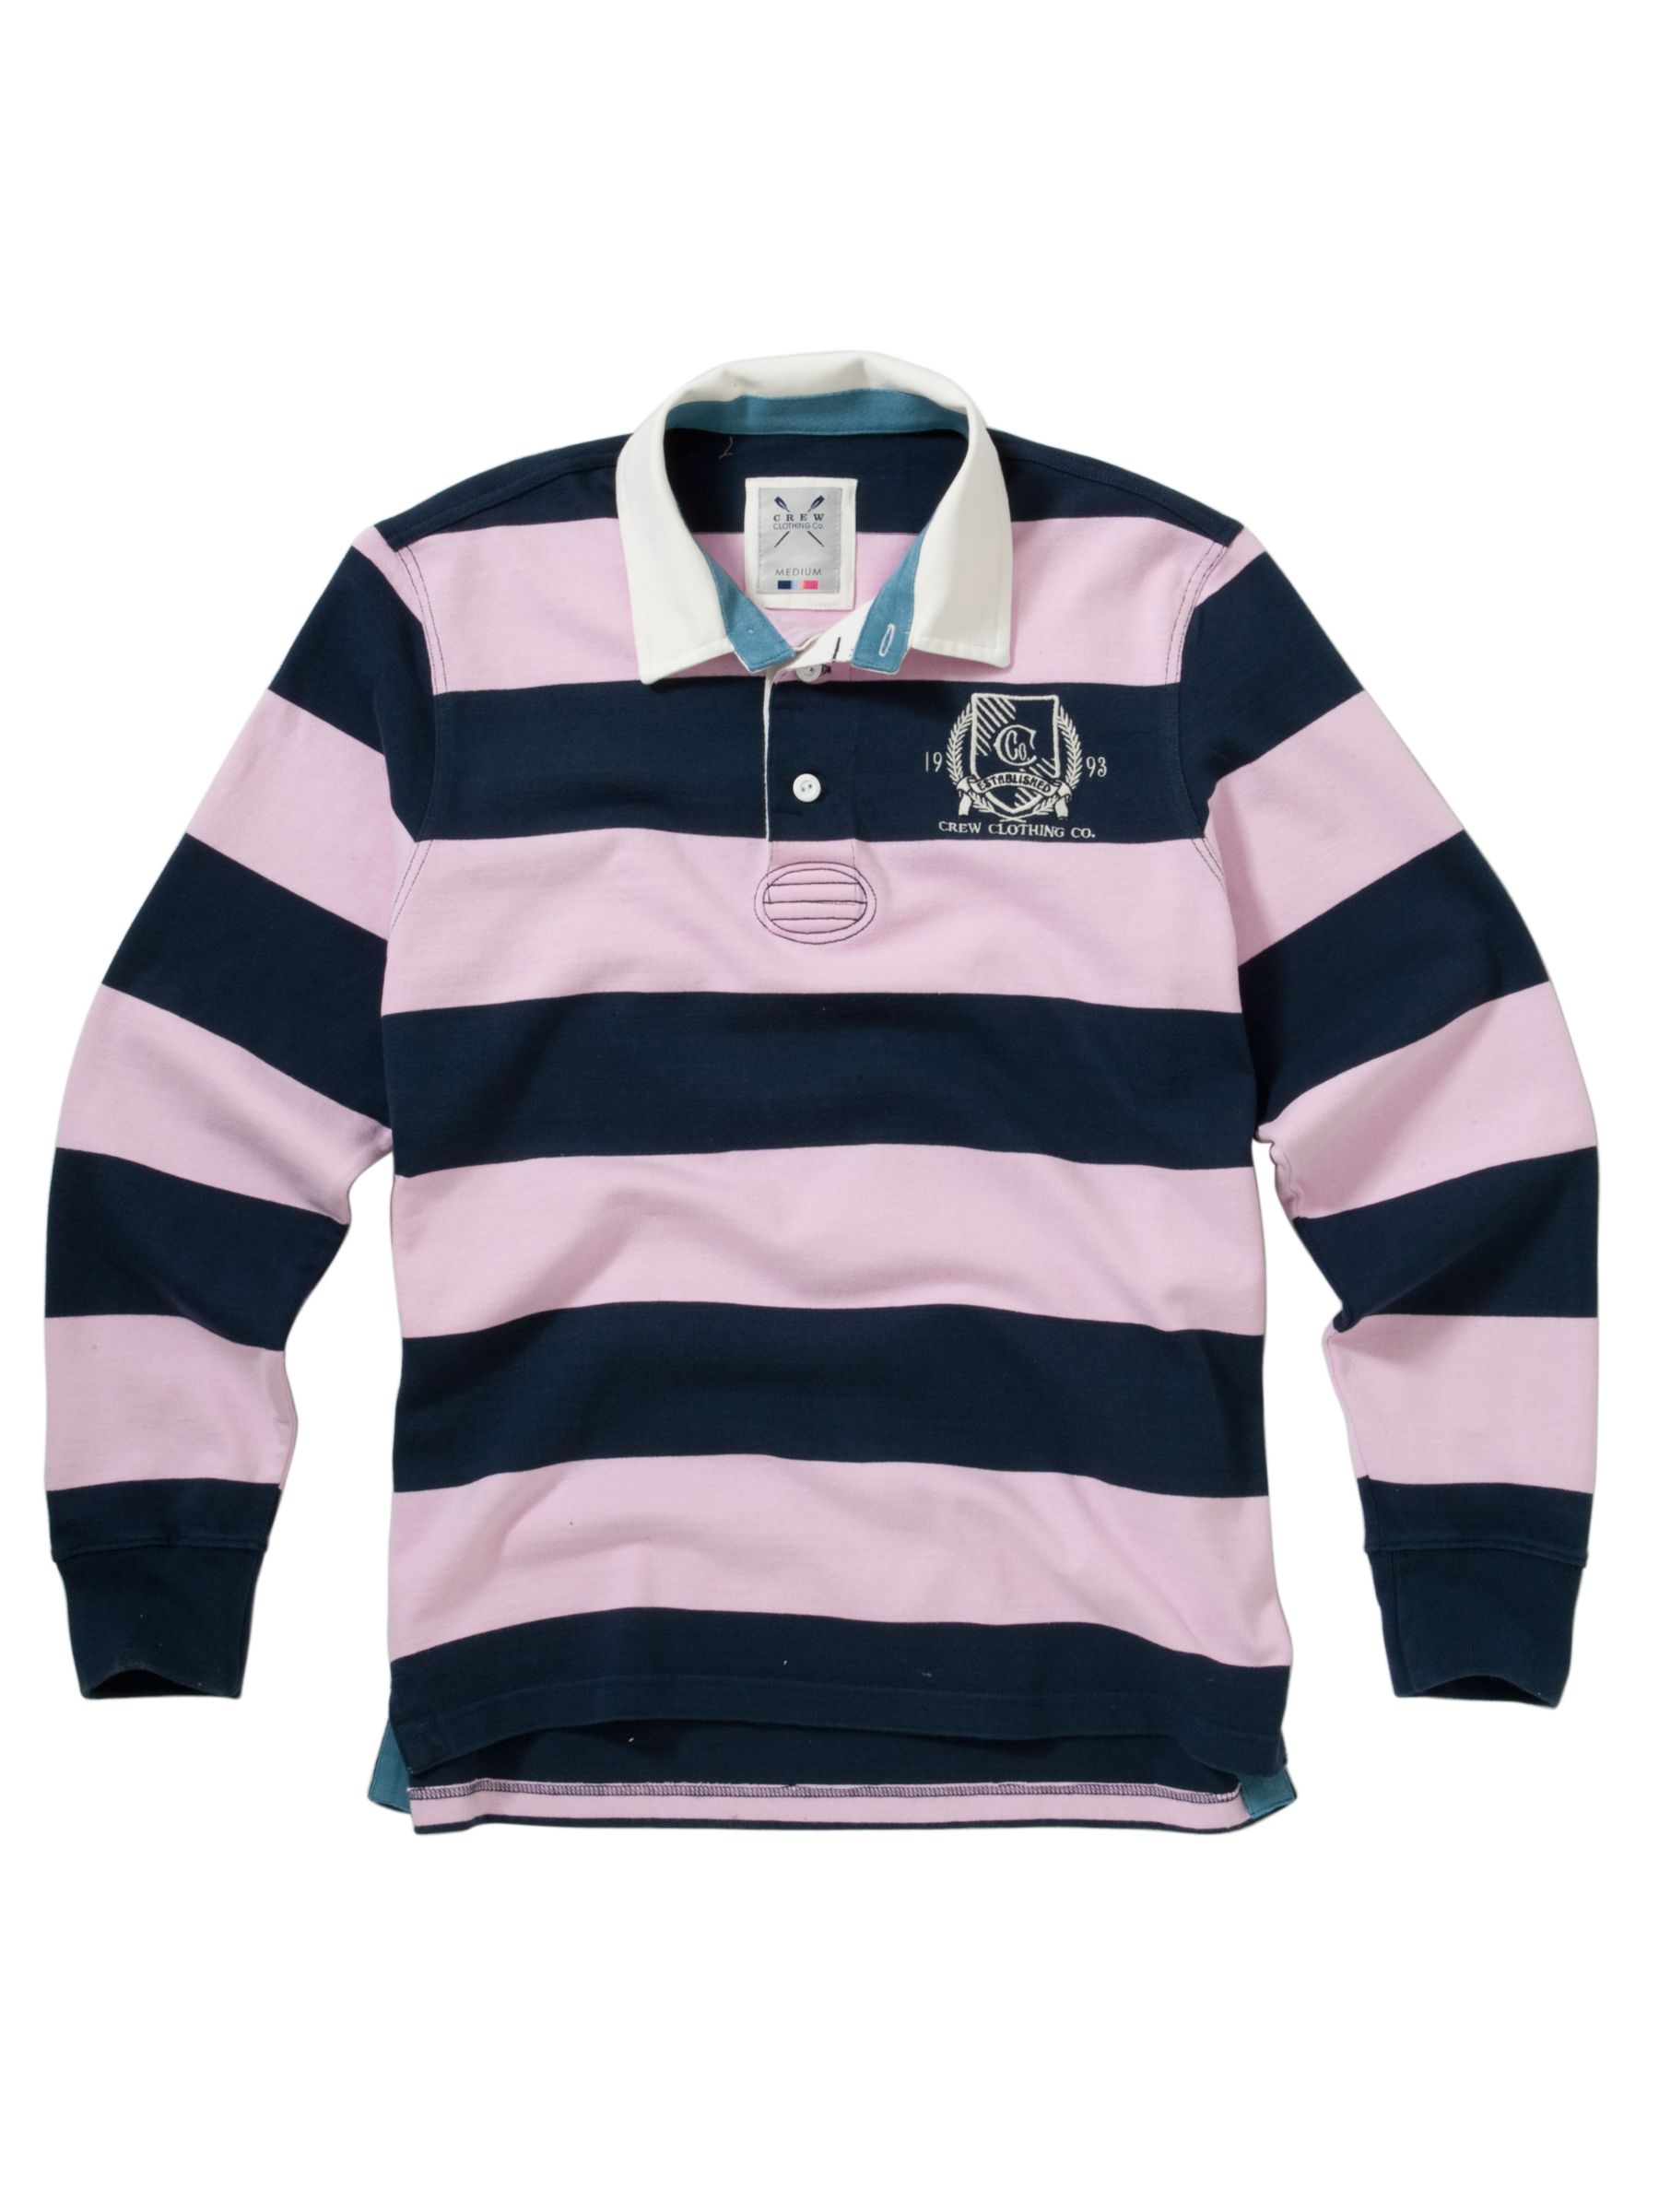 College Rugby Shirt, Navy/pink